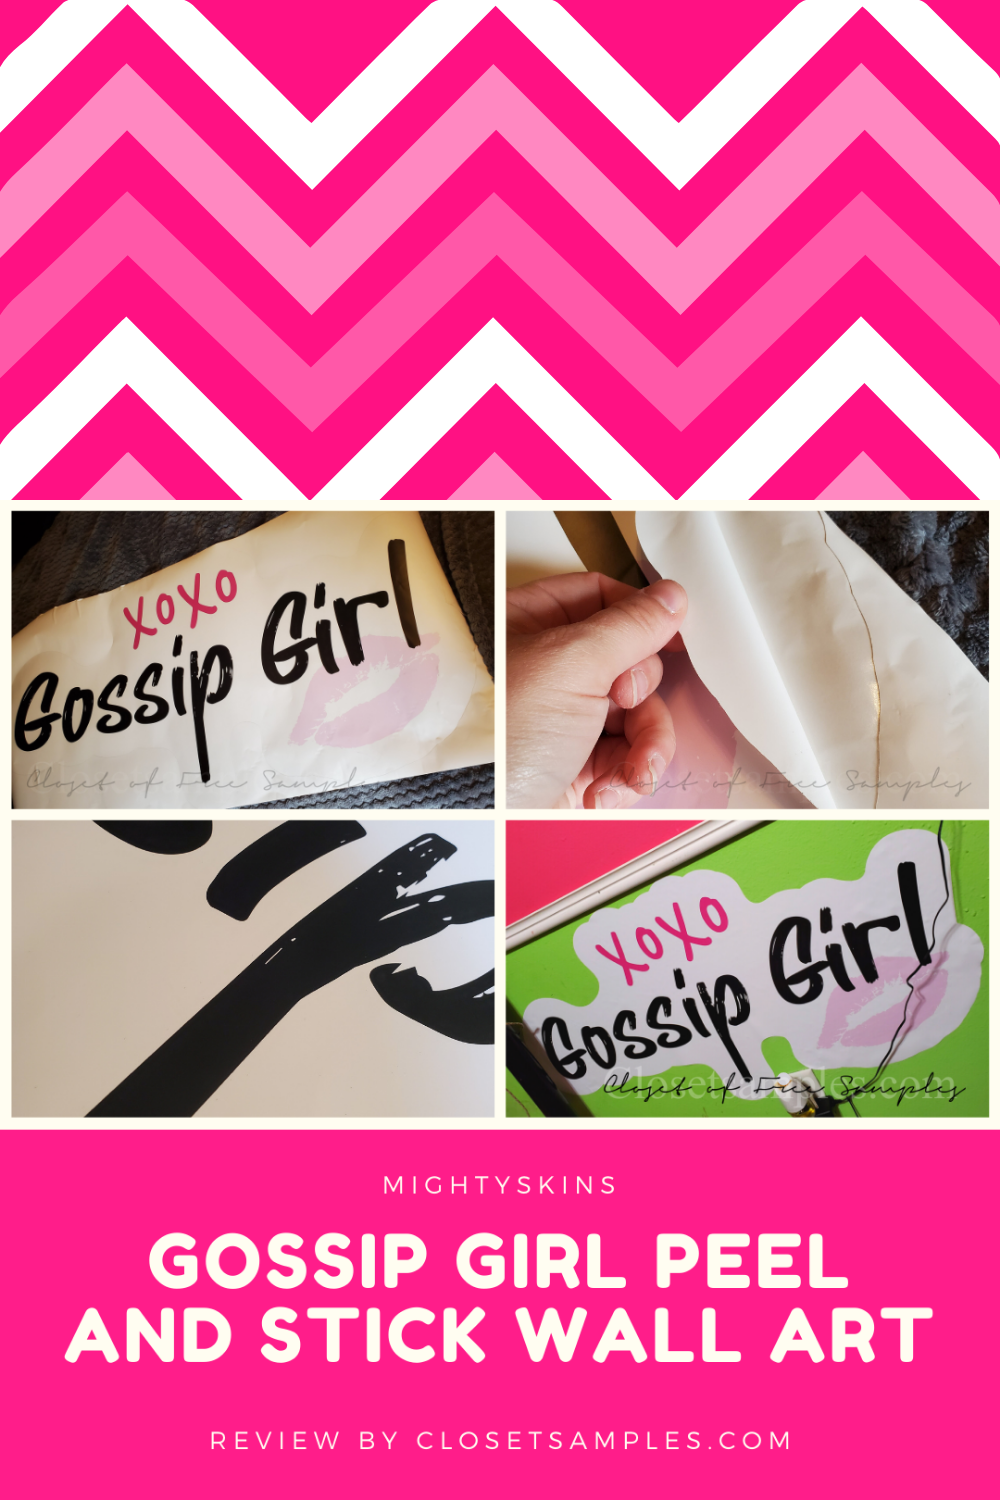 MightySkins-Gossip-Girl-Peel-And-Stick-Wall-Art-Review-closetsamples-2.png